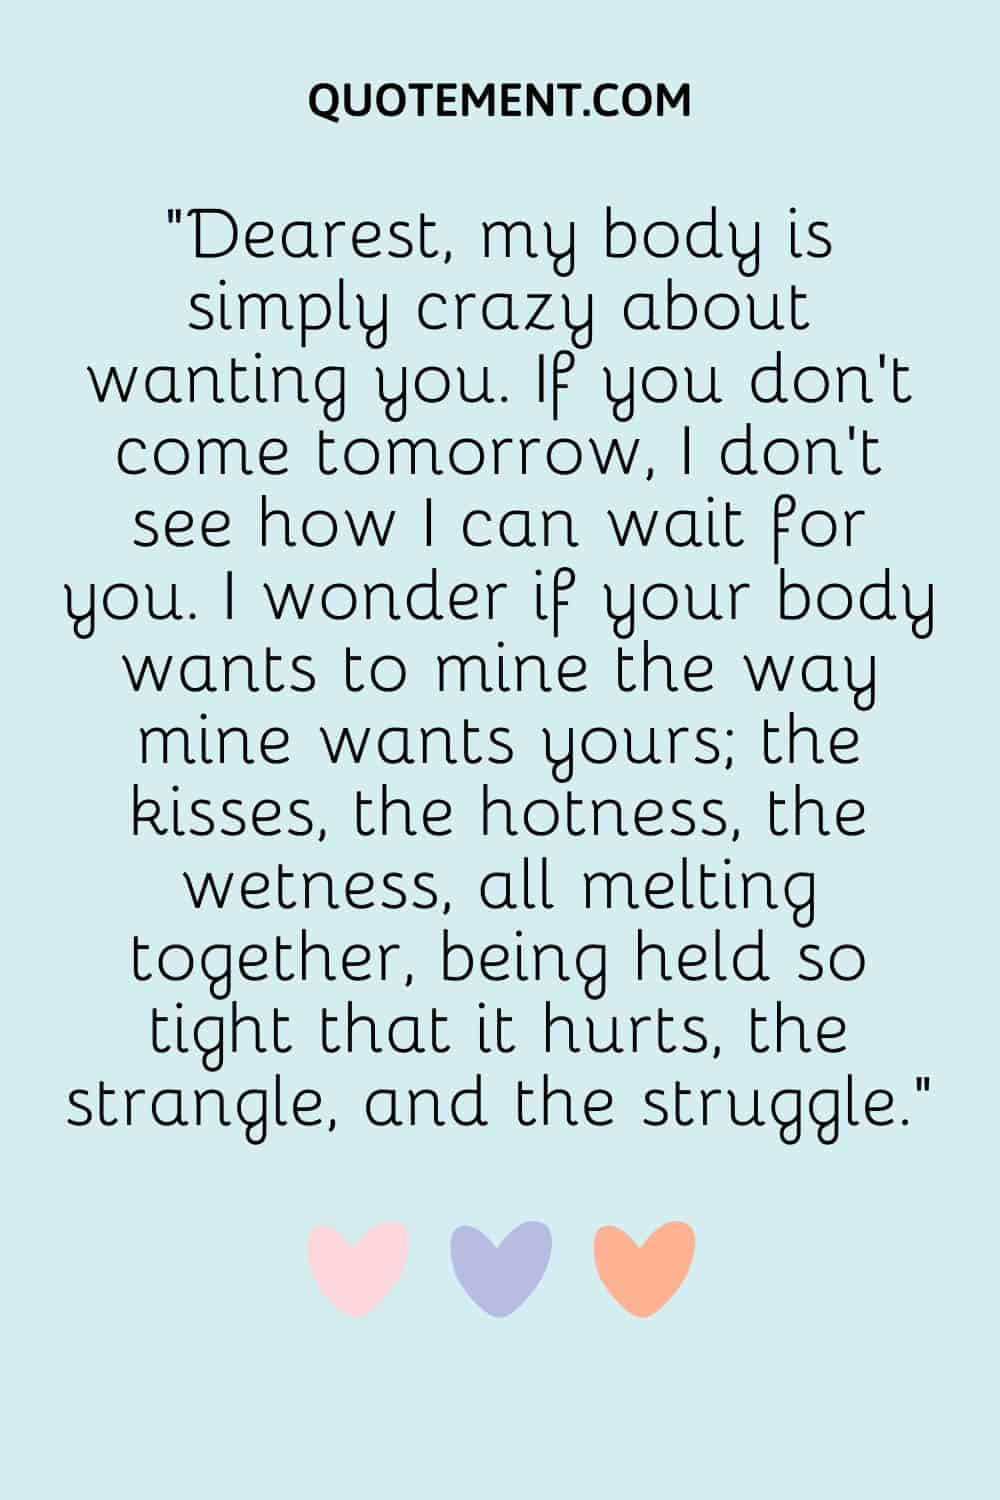 Dearest, my body is simply crazy about wanting you